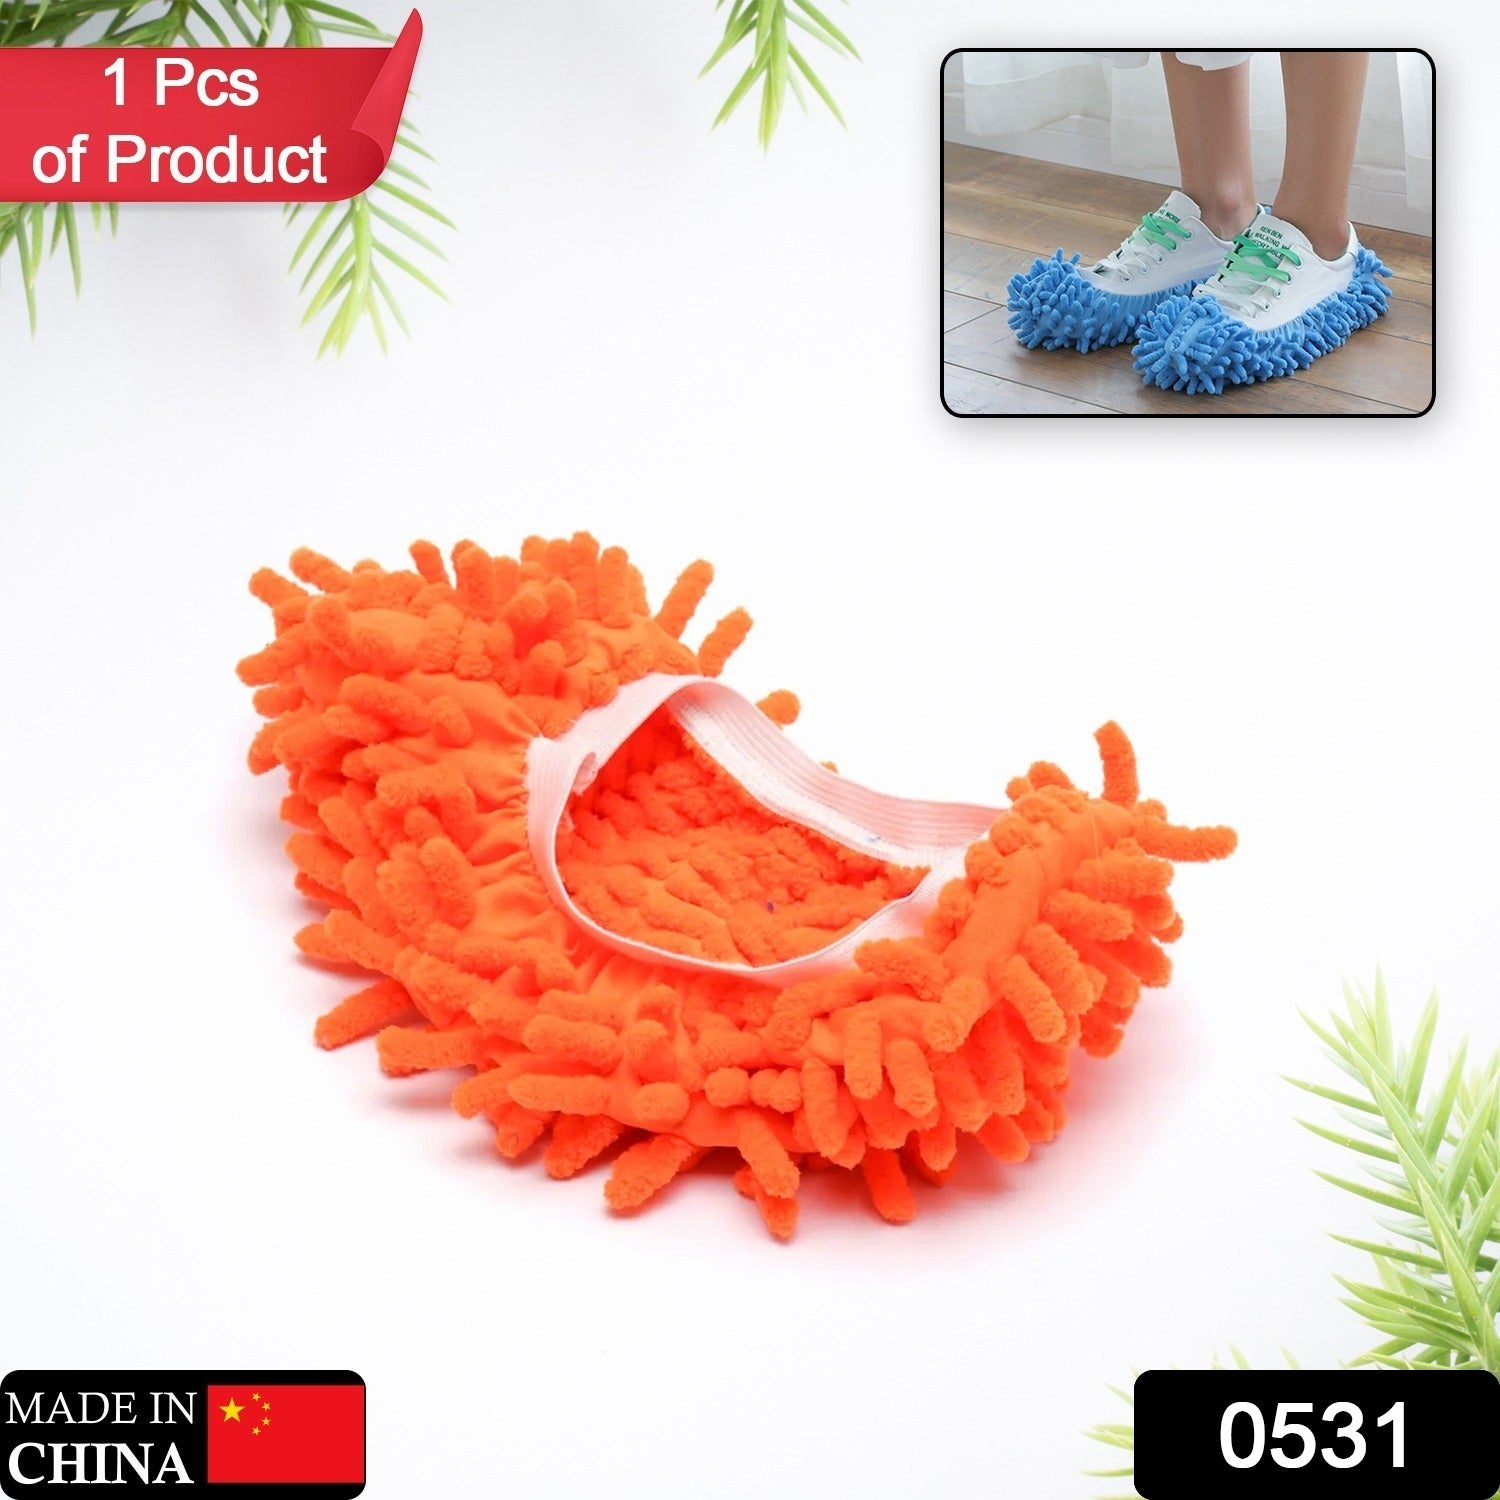 0531  1Pc Mop Slipper Shoes Cover, Floor Dust Cleaning Household Wiping Mops Head, Floor Cleaning Shoes Cover for House (1 Pc)